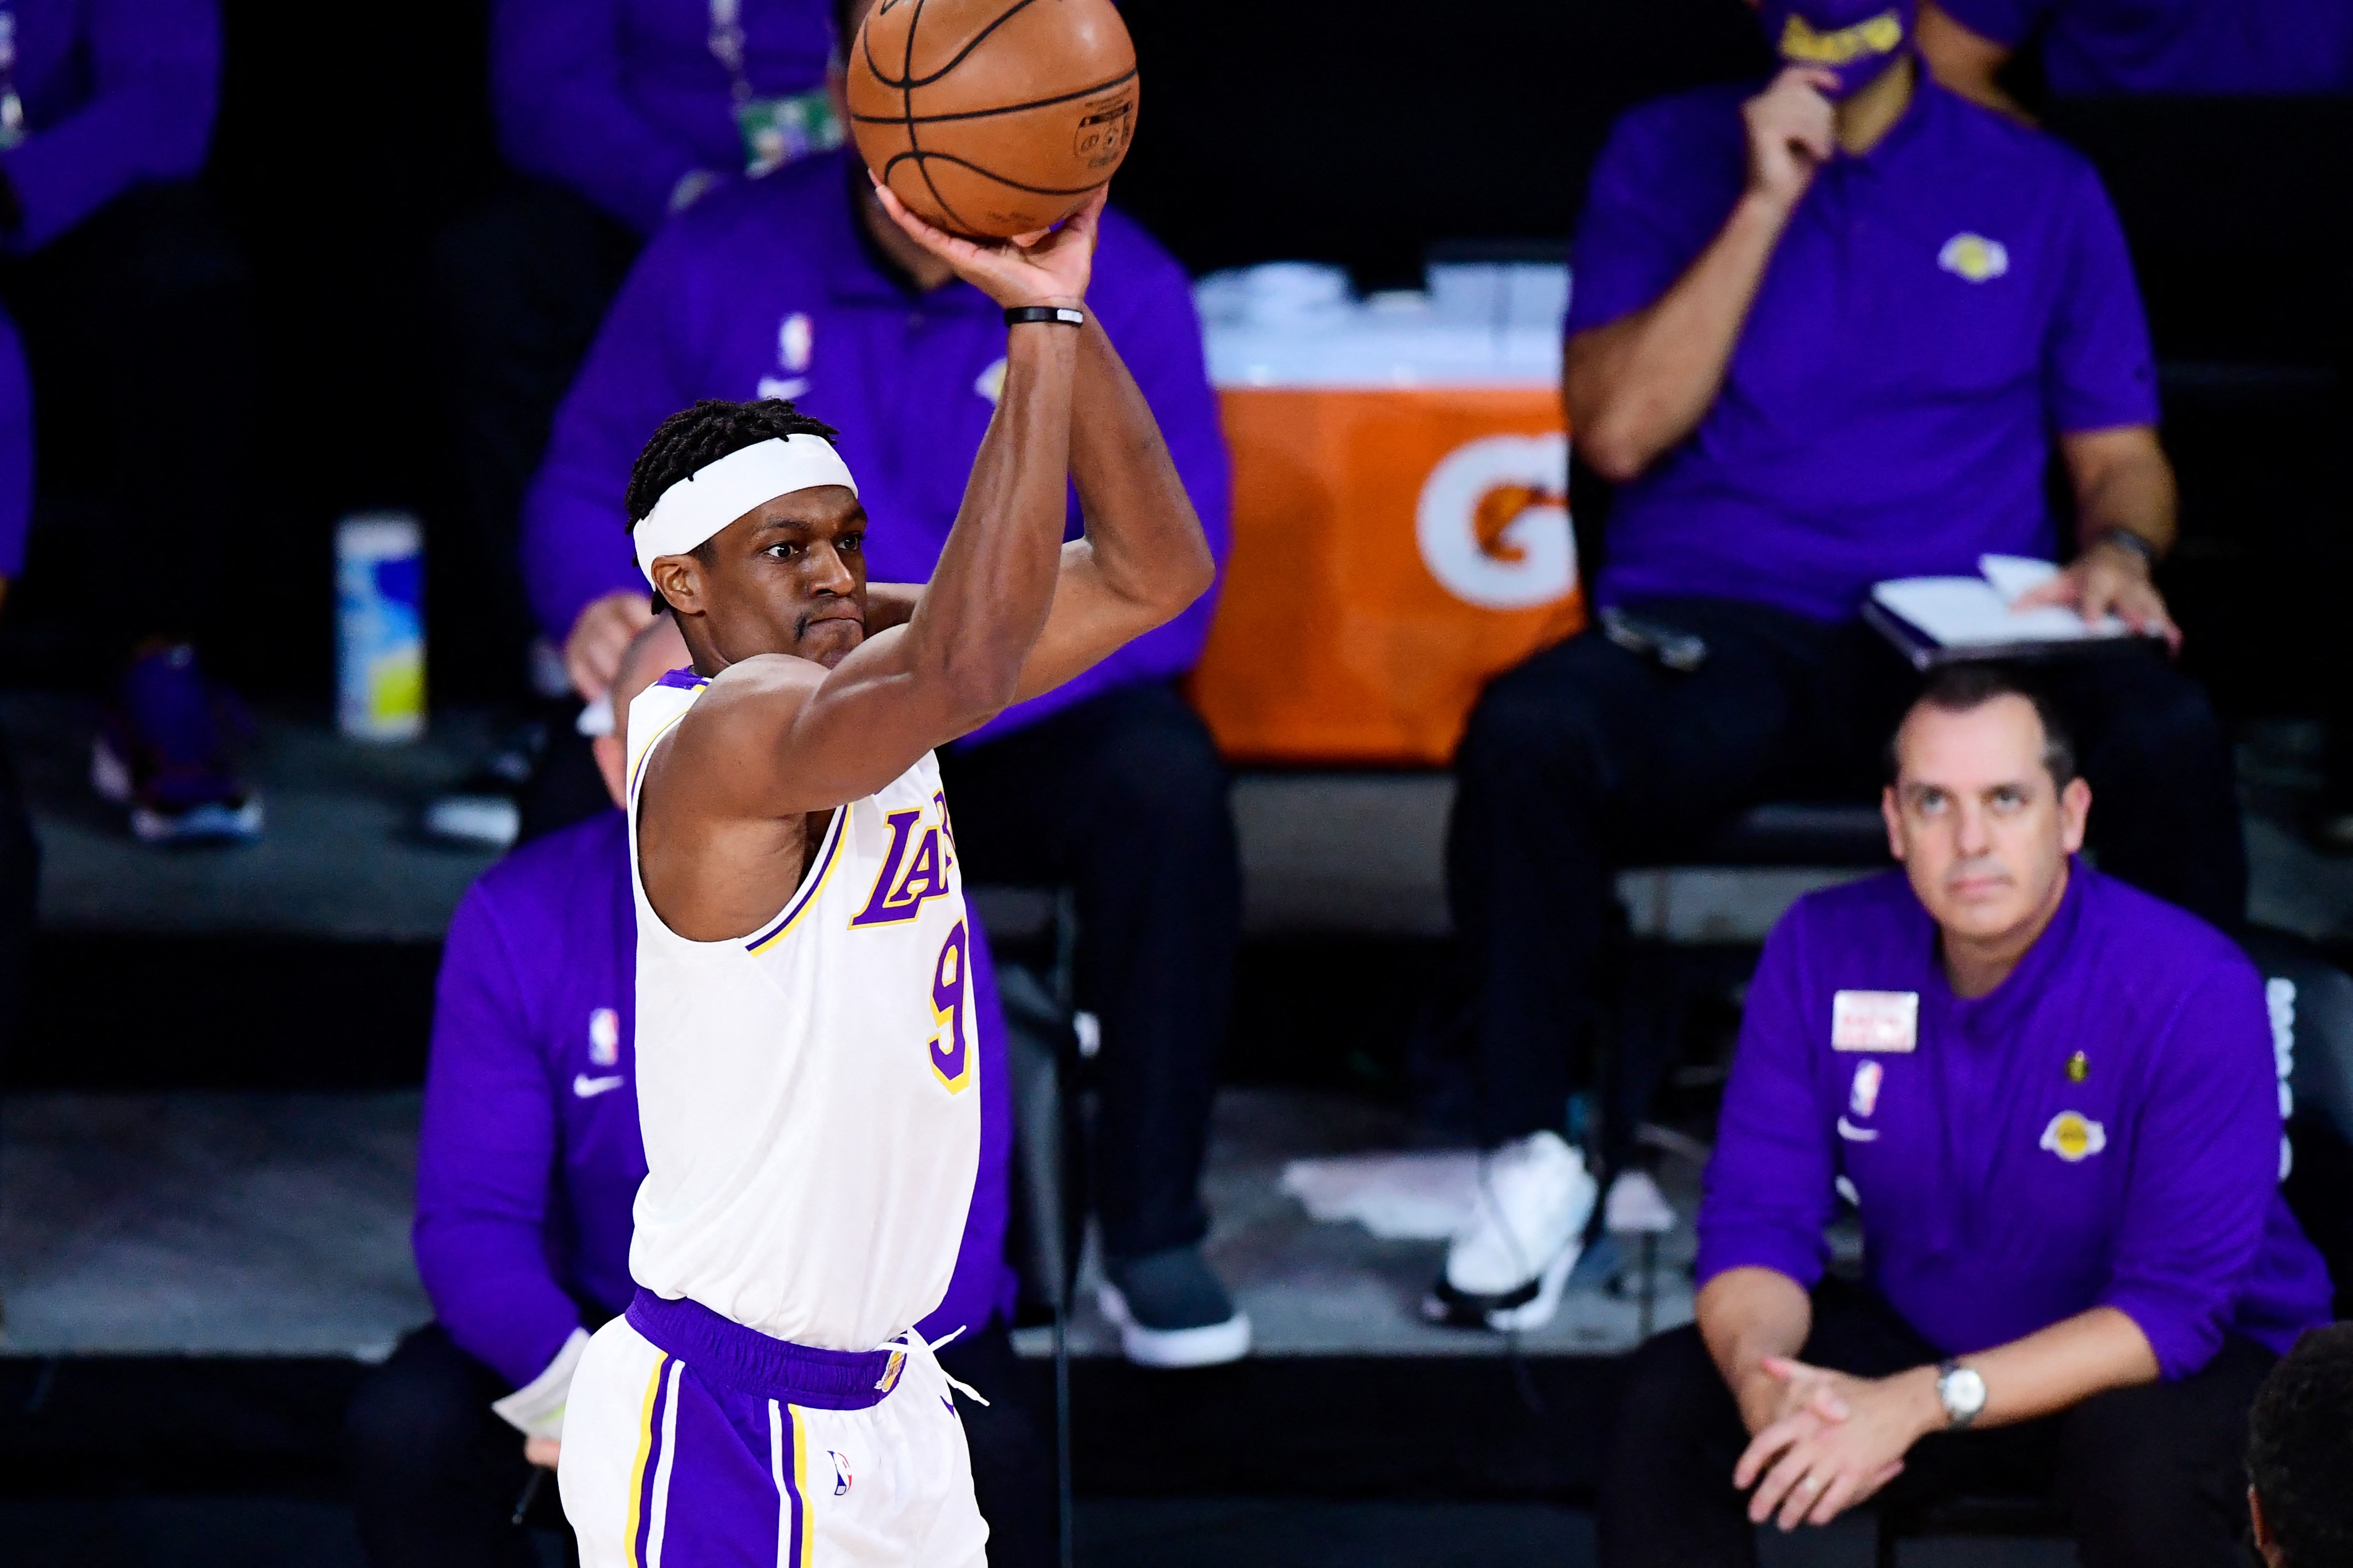 Rajon Rondo is BACK!!!!! #9  Basketball pictures, Sports pictures, Celtics  basketball